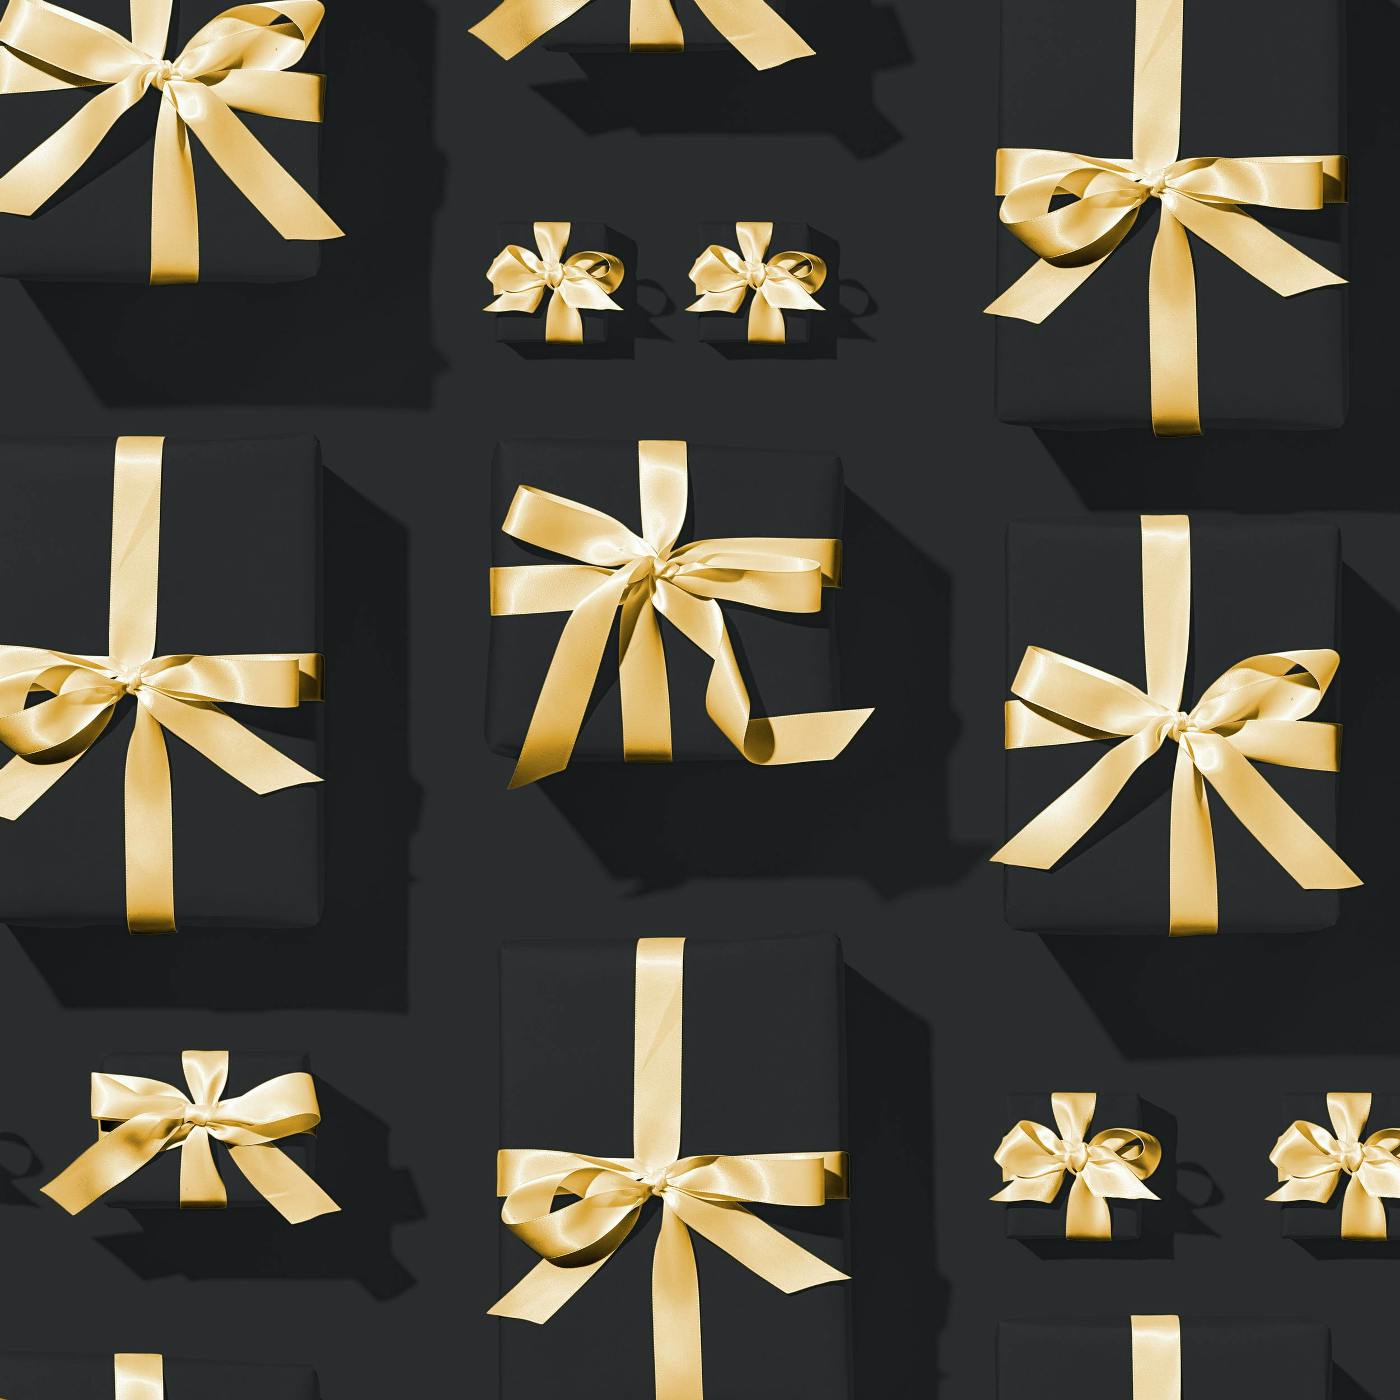 Black presents with gold ribbons